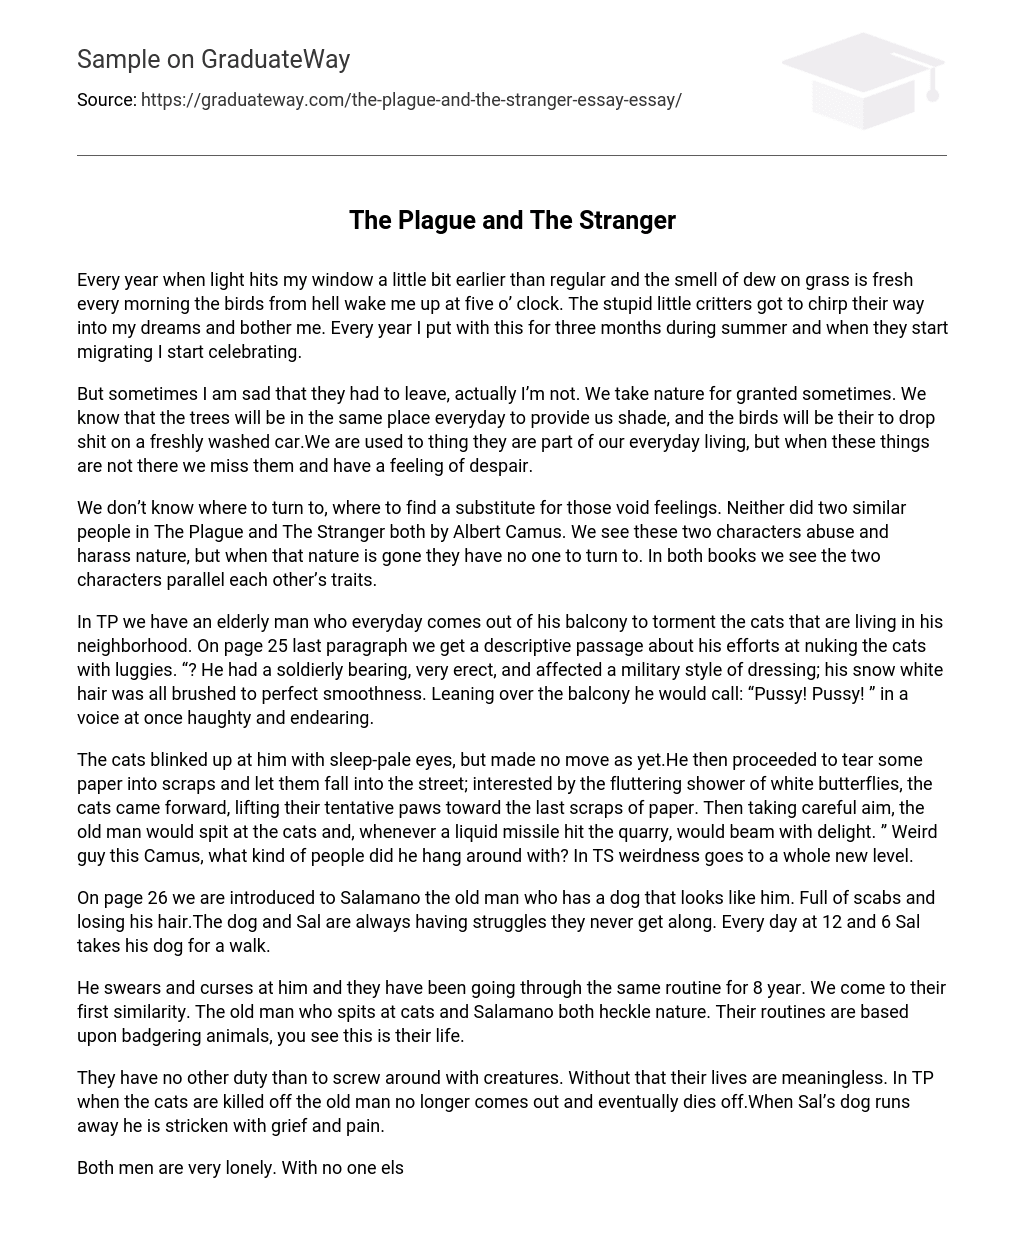 The Plague and The Stranger